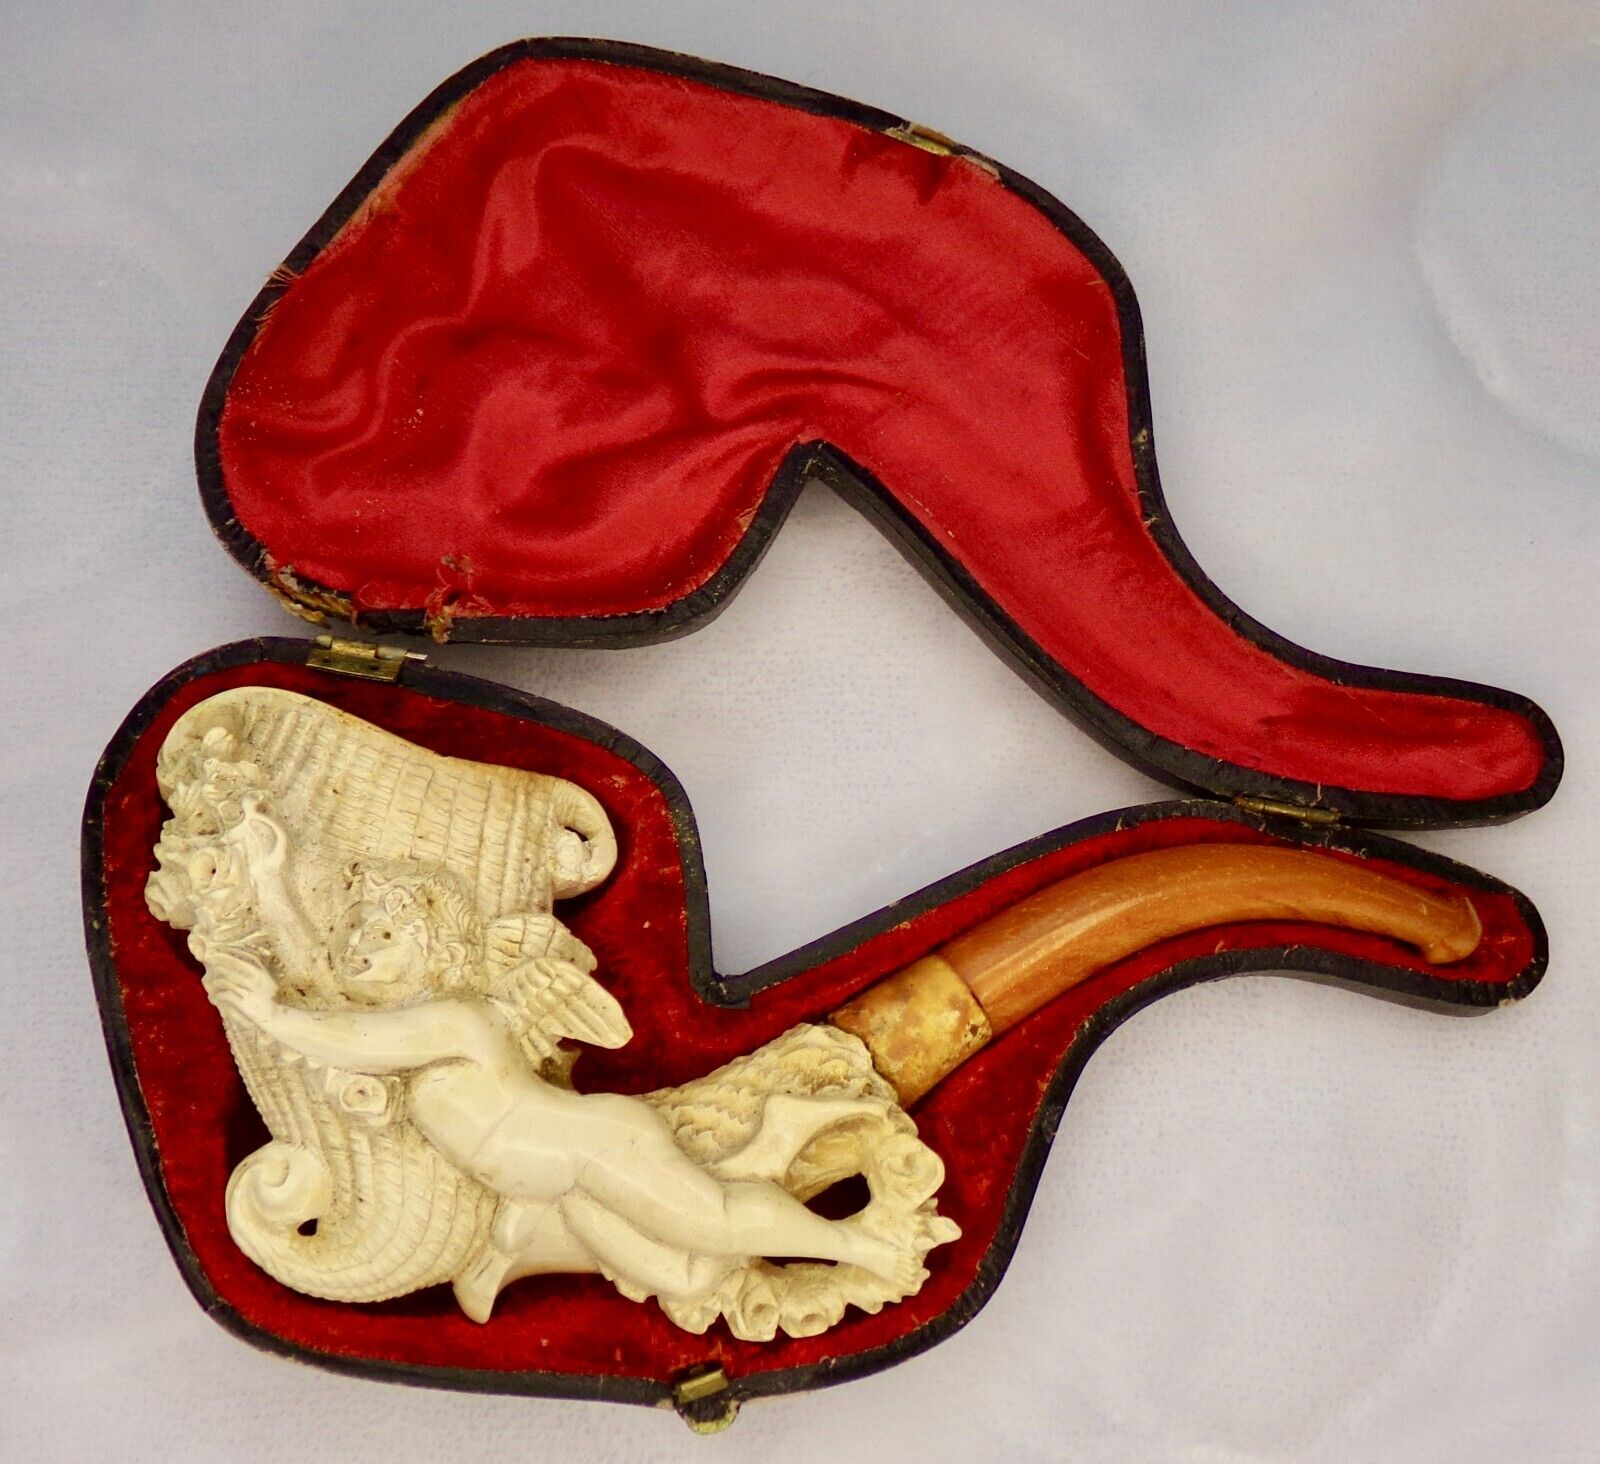 A Fantastic Antique 19th Century Meerschaum Tobacco Pipe With a Nude Cherub